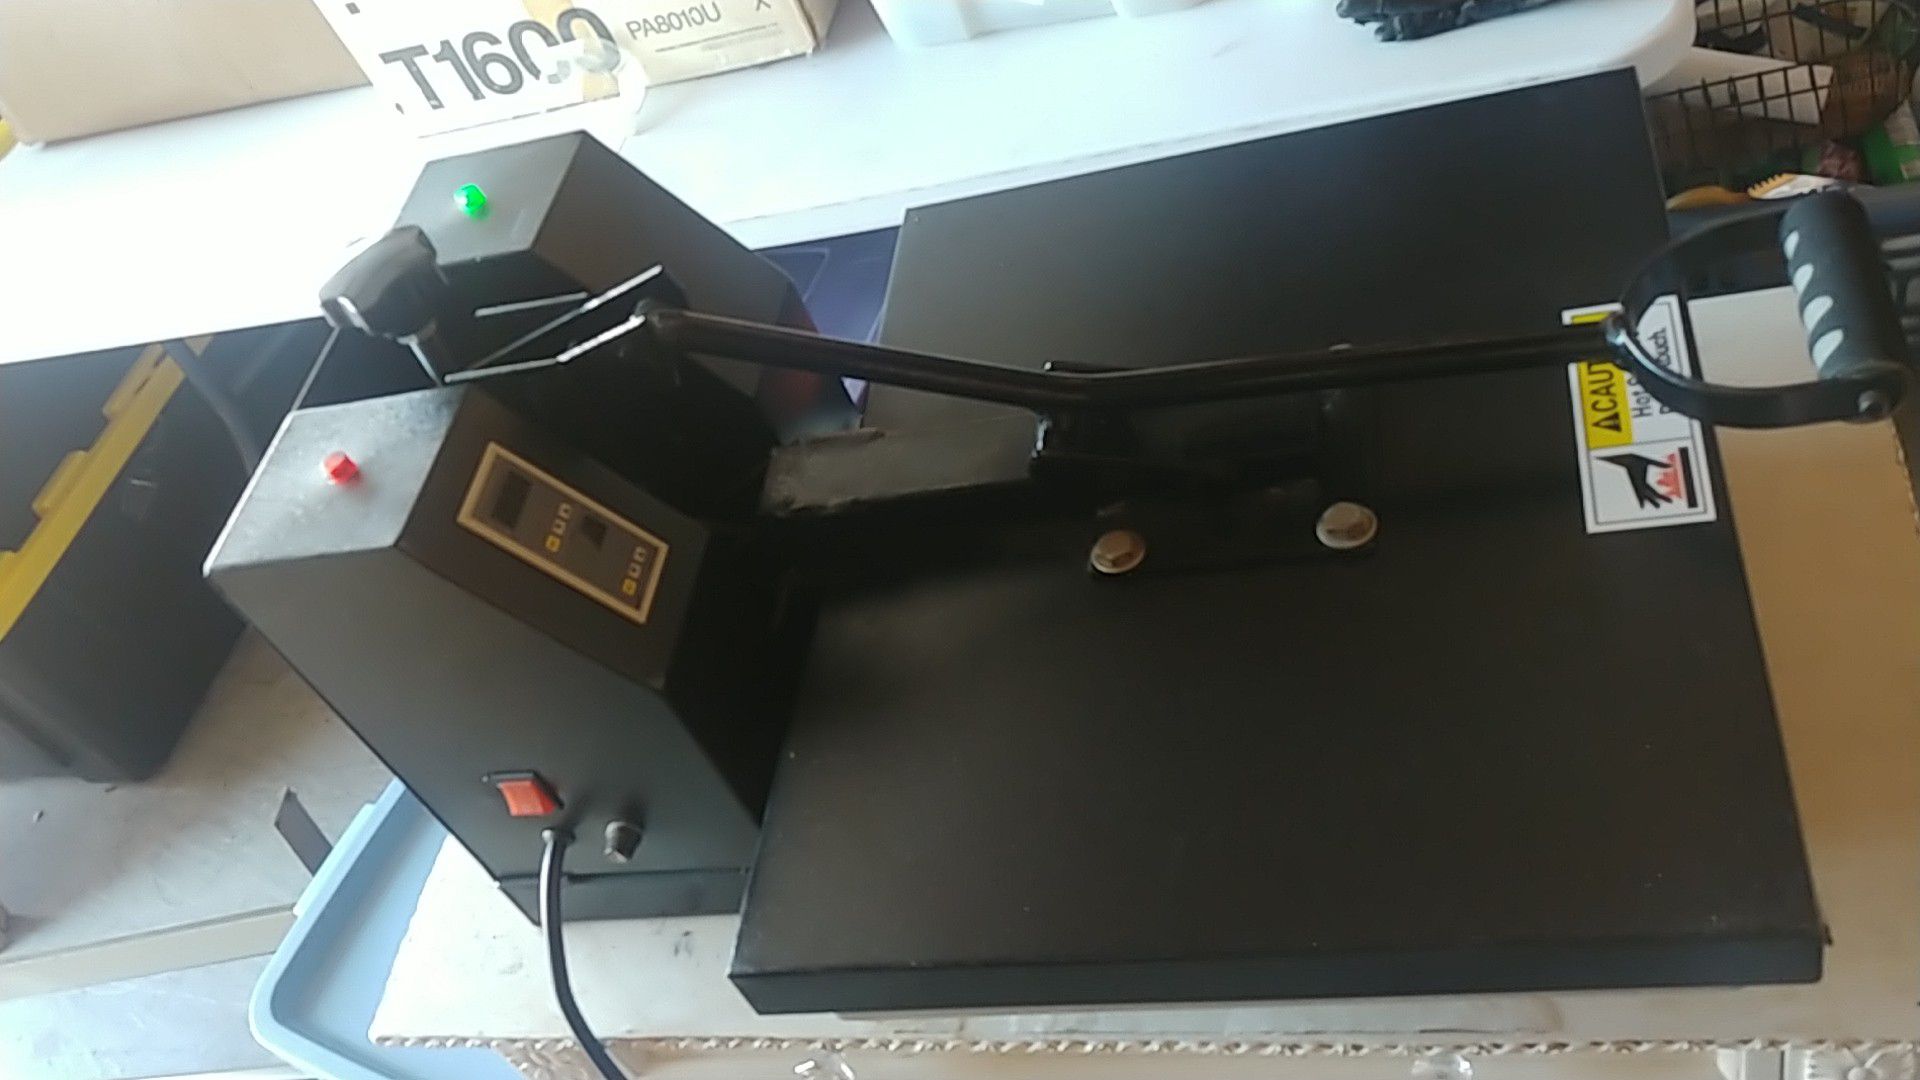 15 x 15 heat press for t-shirts used